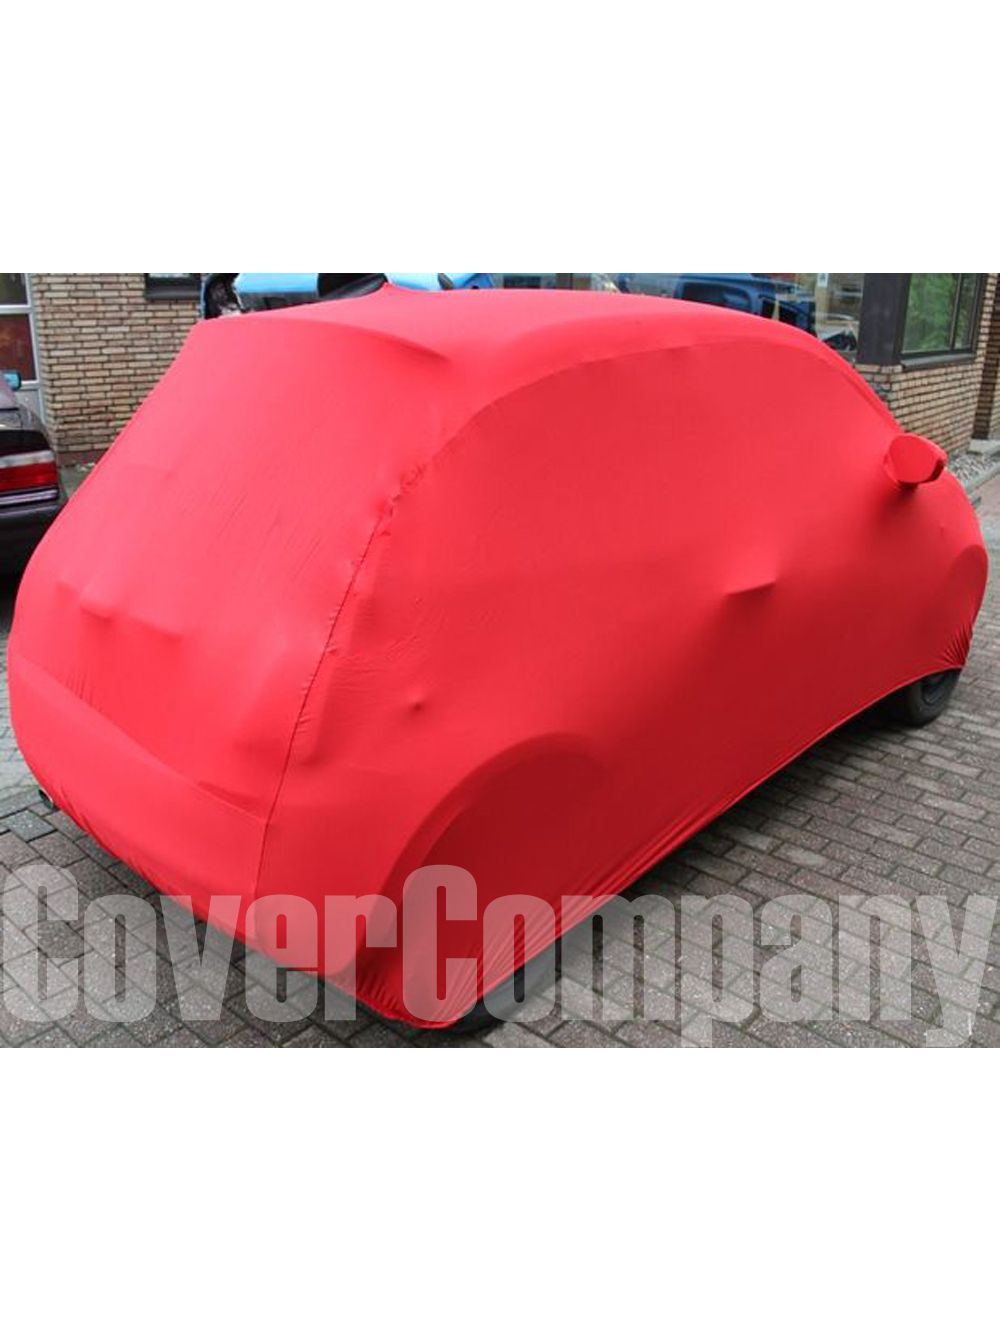 Car Cover for Fiat. High quality indoor car covers USA